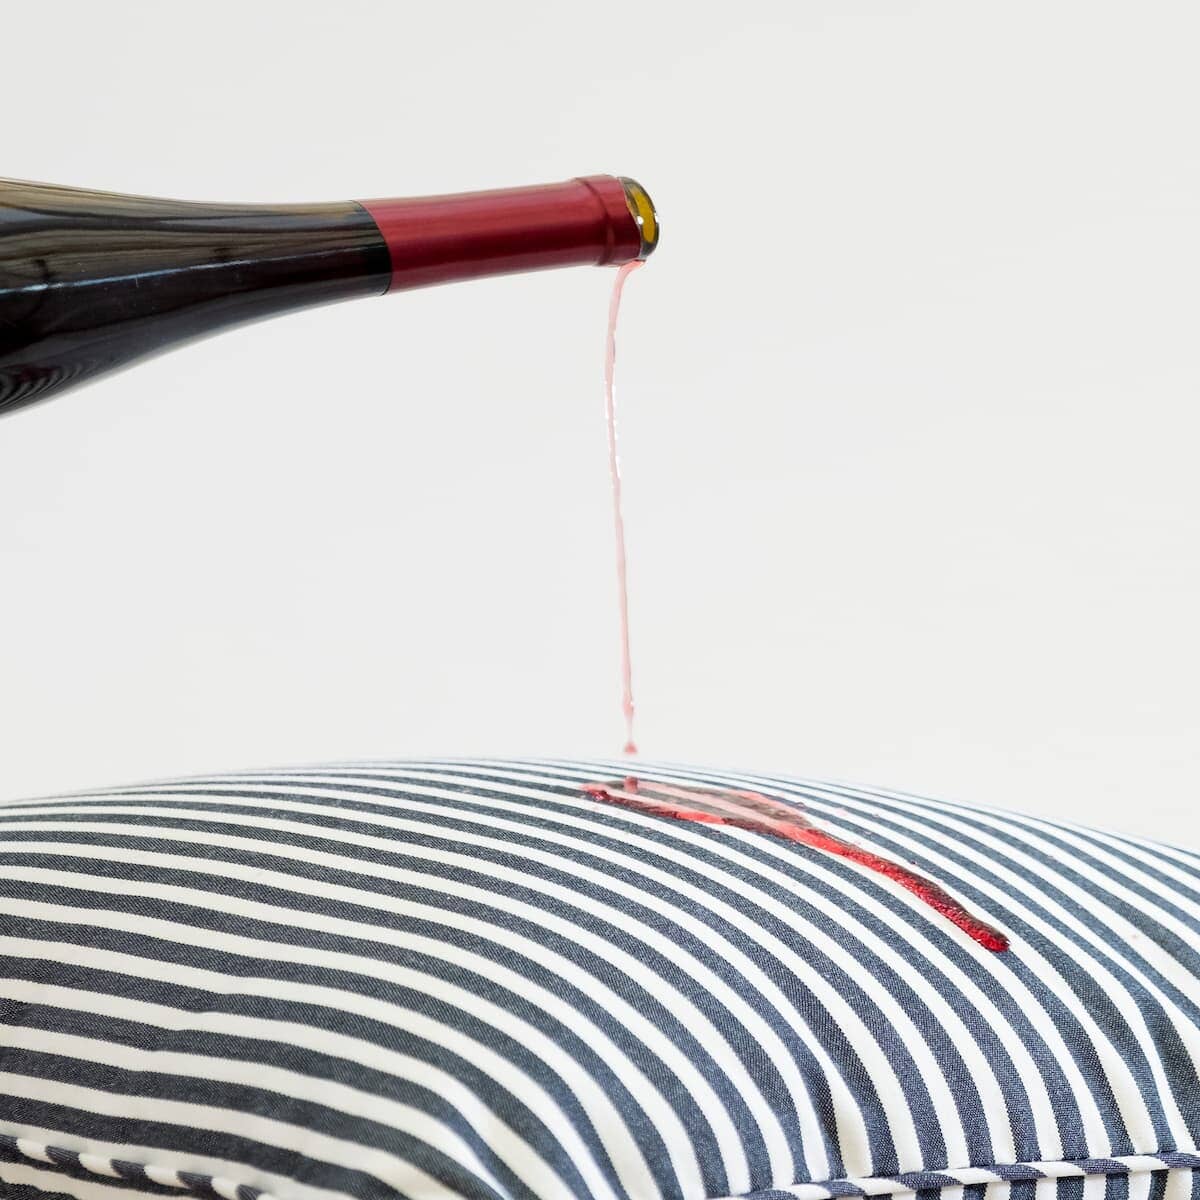 Studio image of red wine being poured on the outdoor cushion